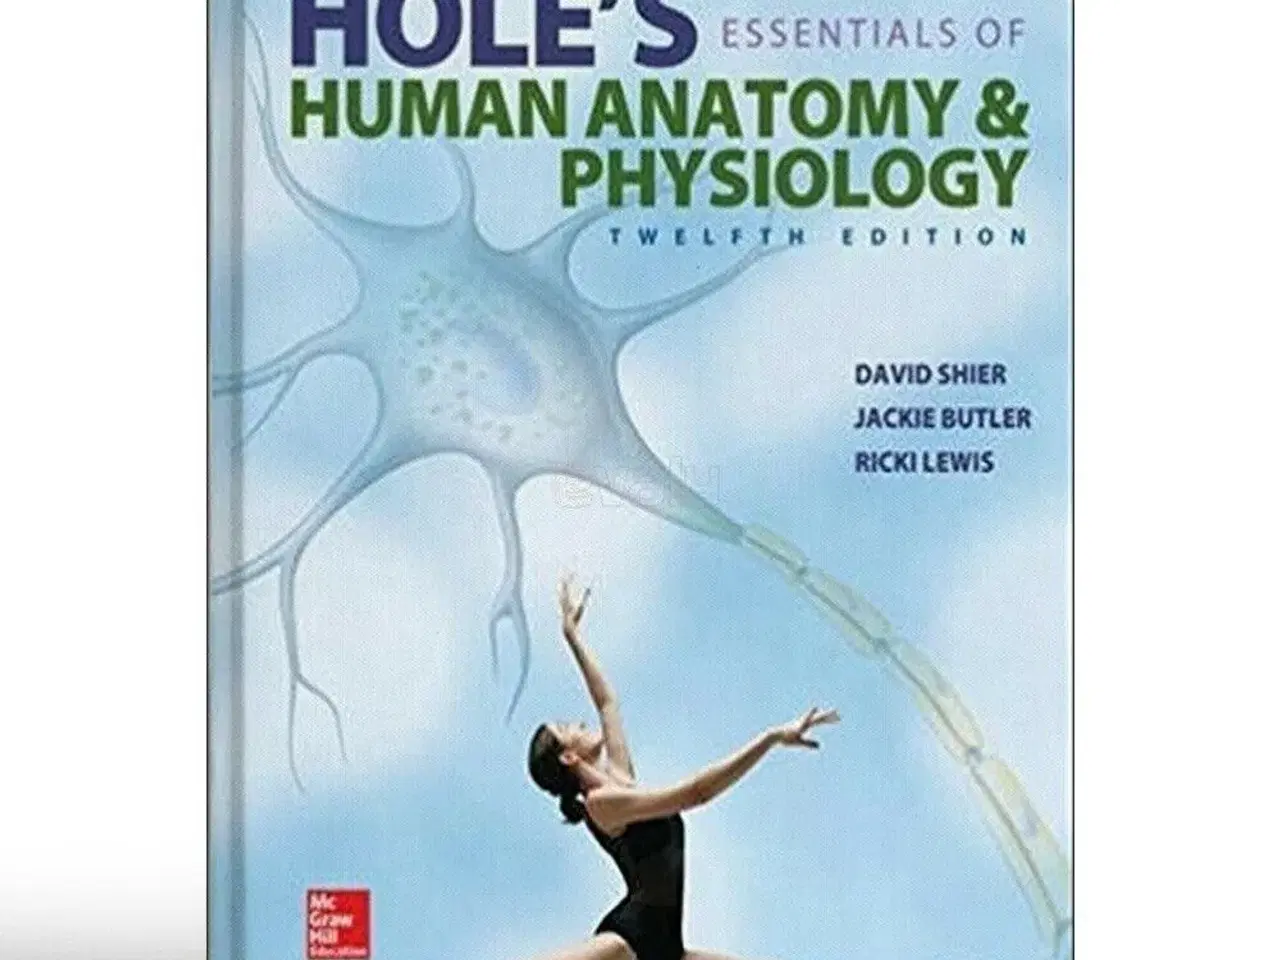 Billede 1 - Hole's Essentials of Human Anatomy and Physiology 